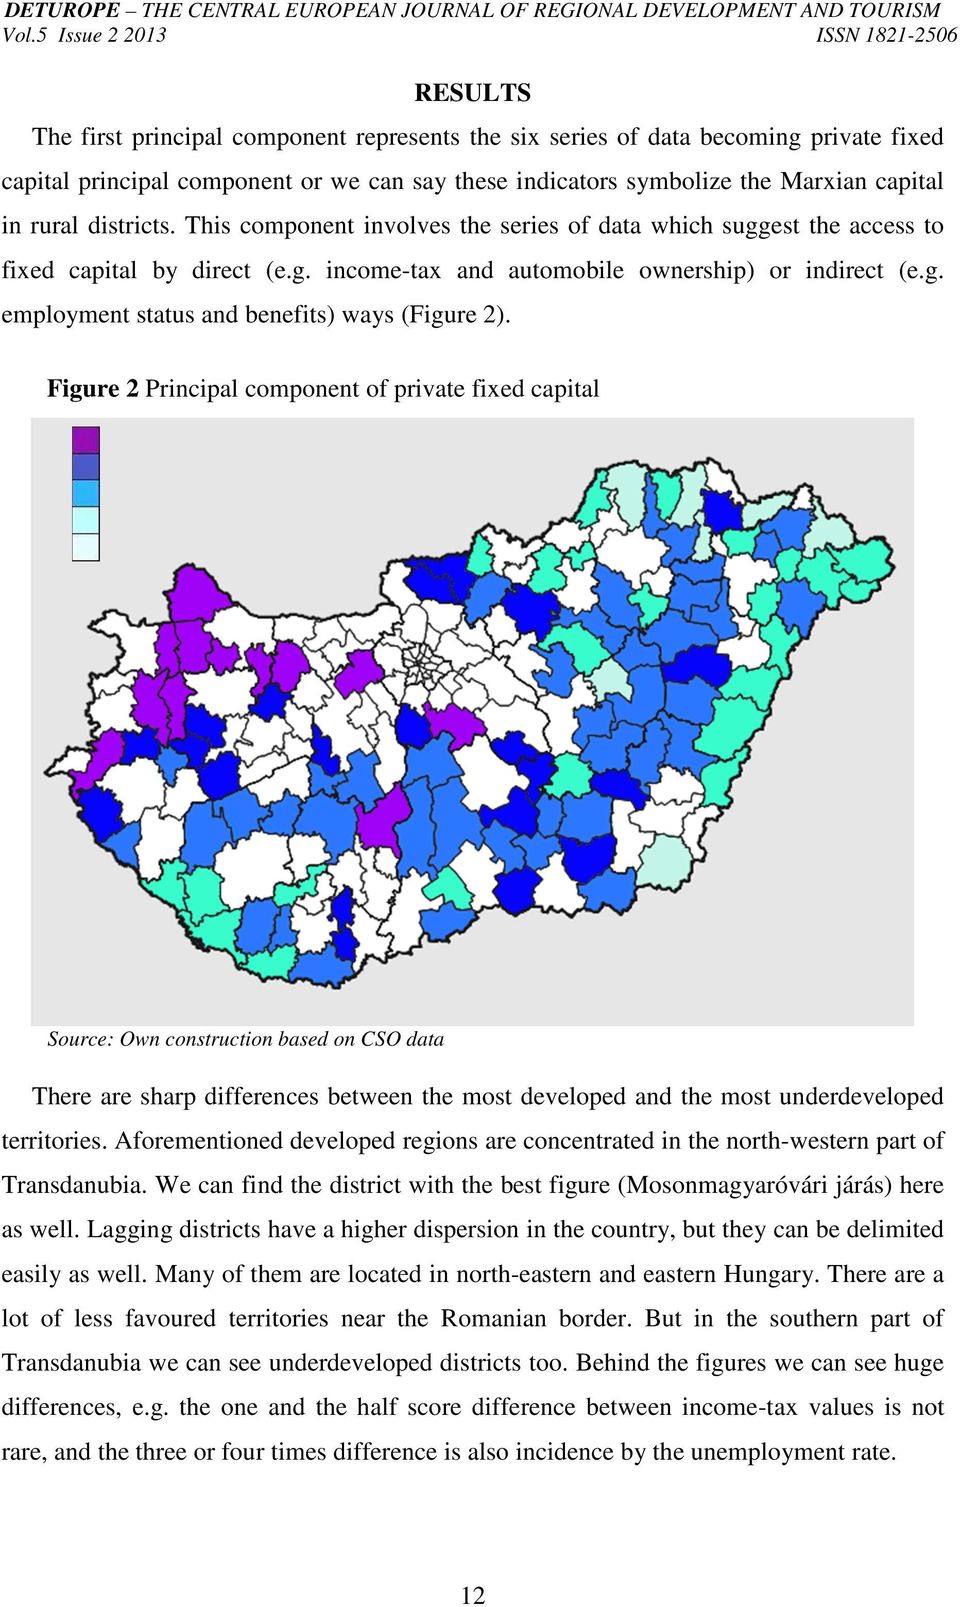 Figure 2 Principal component of private fixed capital Most developed districts (12) Relatively developed districts (21) Slightly developed districts (40) Undeveloped districts (24) Most undeveloped